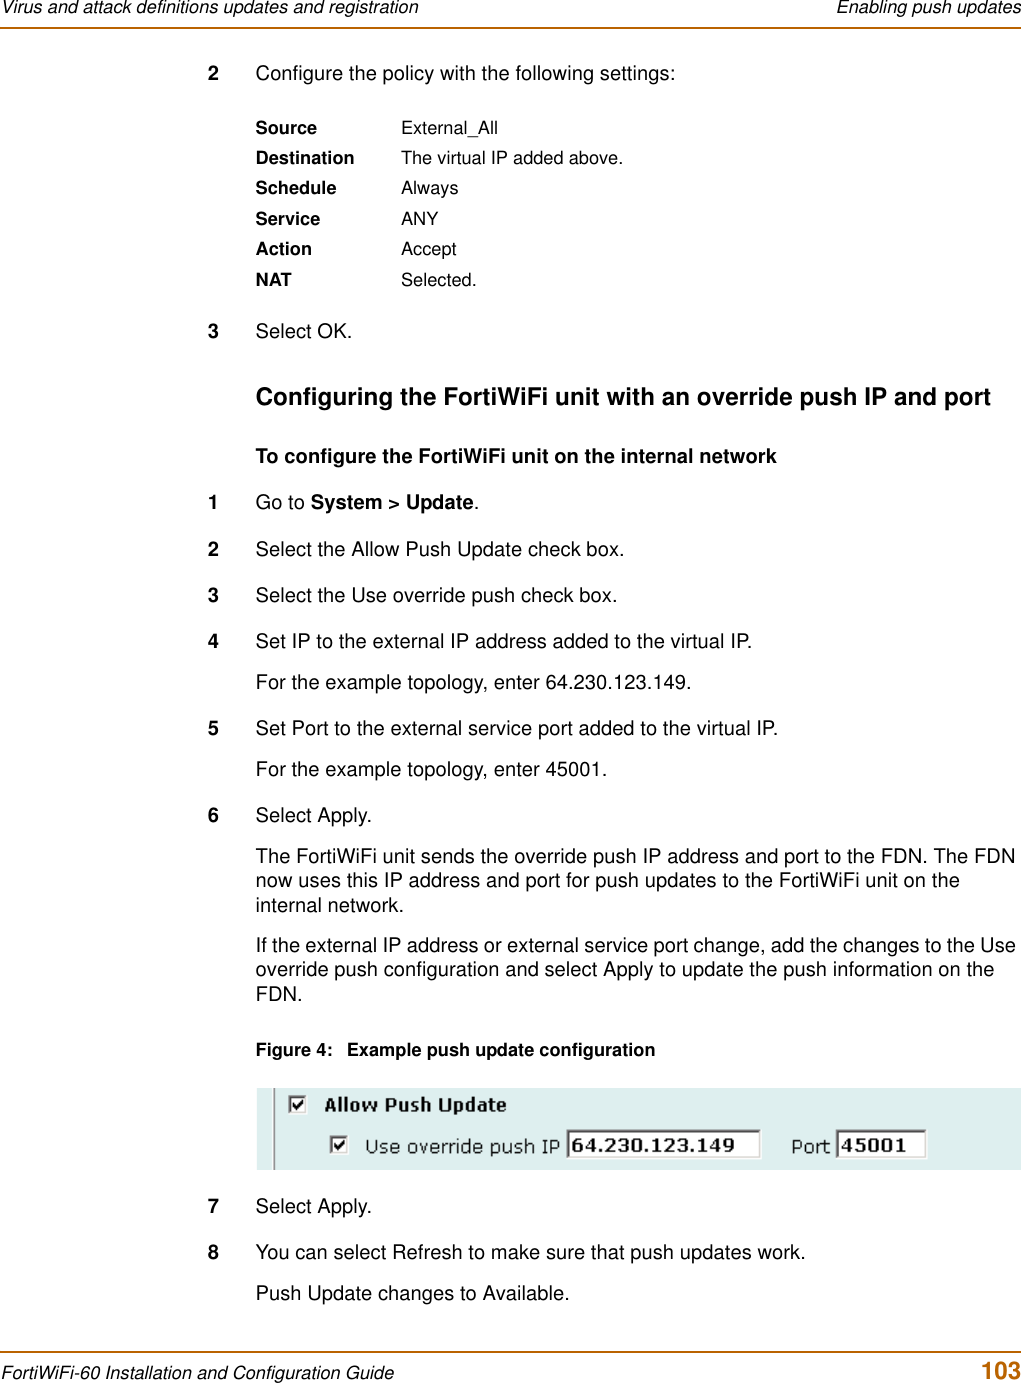 Virus and attack definitions updates and registration  Enabling push updatesFortiWiFi-60 Installation and Configuration Guide  1032Configure the policy with the following settings:3Select OK.Configuring the FortiWiFi unit with an override push IP and portTo configure the FortiWiFi unit on the internal network1Go to System &gt; Update.2Select the Allow Push Update check box.3Select the Use override push check box.4Set IP to the external IP address added to the virtual IP.For the example topology, enter 64.230.123.149.5Set Port to the external service port added to the virtual IP.For the example topology, enter 45001.6Select Apply.The FortiWiFi unit sends the override push IP address and port to the FDN. The FDN now uses this IP address and port for push updates to the FortiWiFi unit on the internal network.If the external IP address or external service port change, add the changes to the Use override push configuration and select Apply to update the push information on the FDN.Figure 4: Example push update configuration7Select Apply.8You can select Refresh to make sure that push updates work.Push Update changes to Available.Source External_AllDestination The virtual IP added above.Schedule AlwaysService ANYAction AcceptNAT Selected.